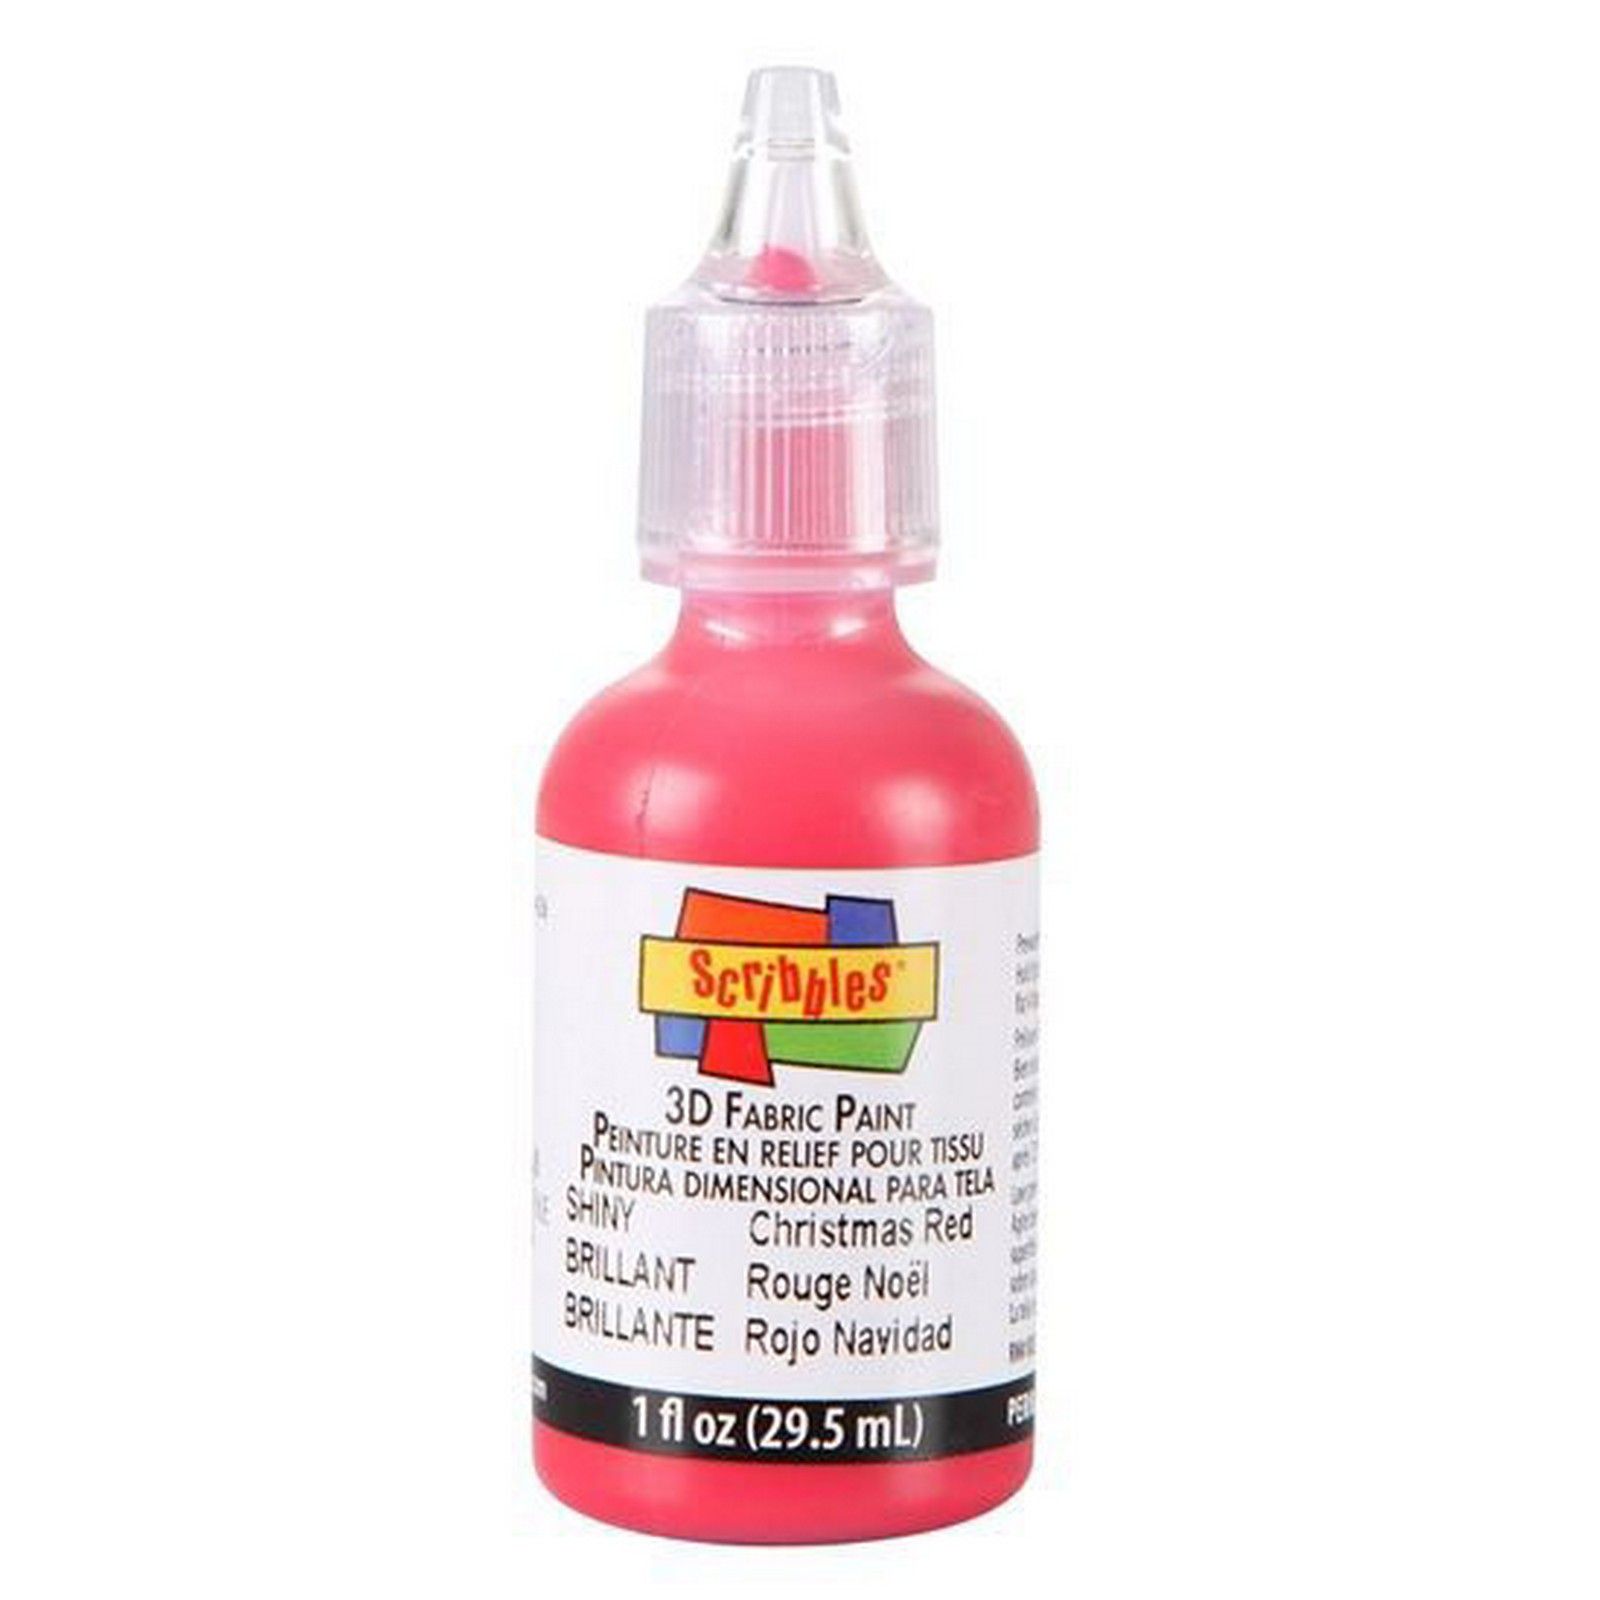 Scribbles • 3D Fabric Paint Shiny 29.5ml Christmas Red